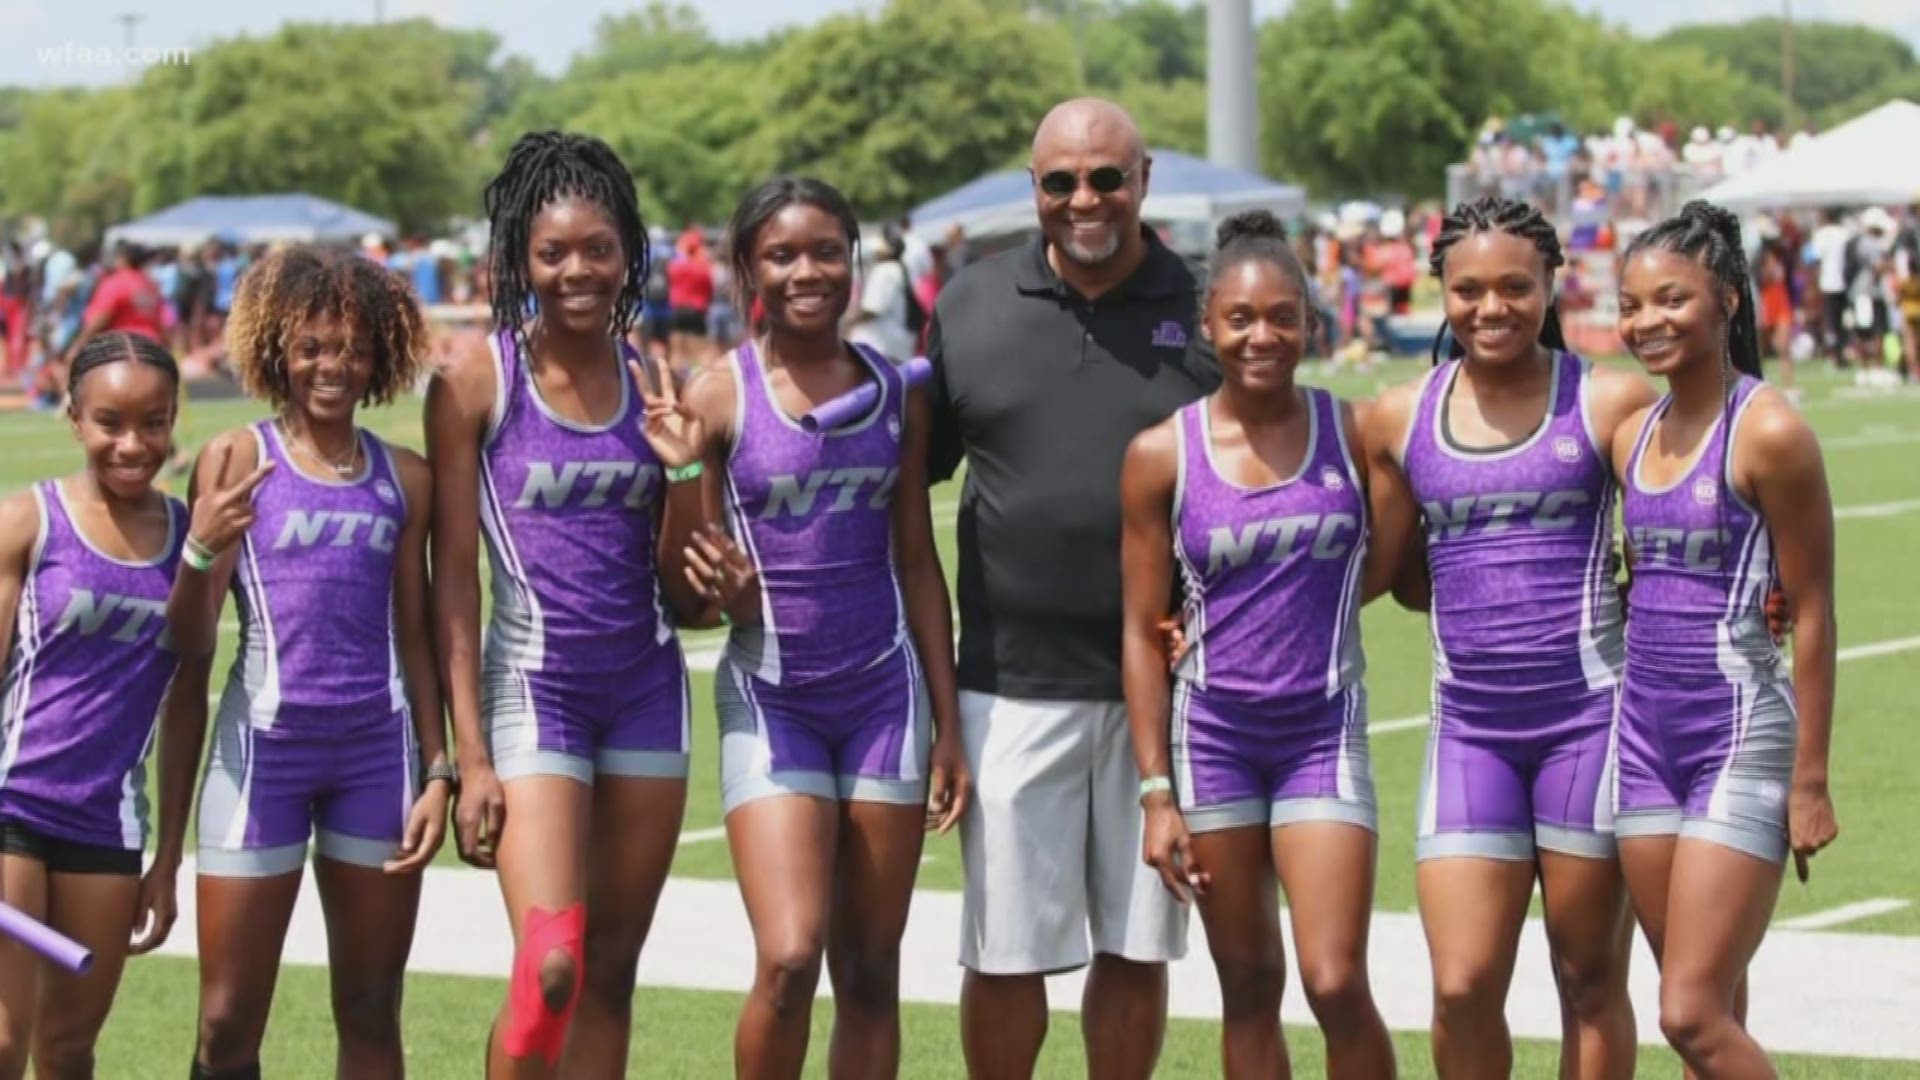 The impact of McDaniel was felt all around the track world, but most especially here in North Texas, where he led the Cheetahs track & field team